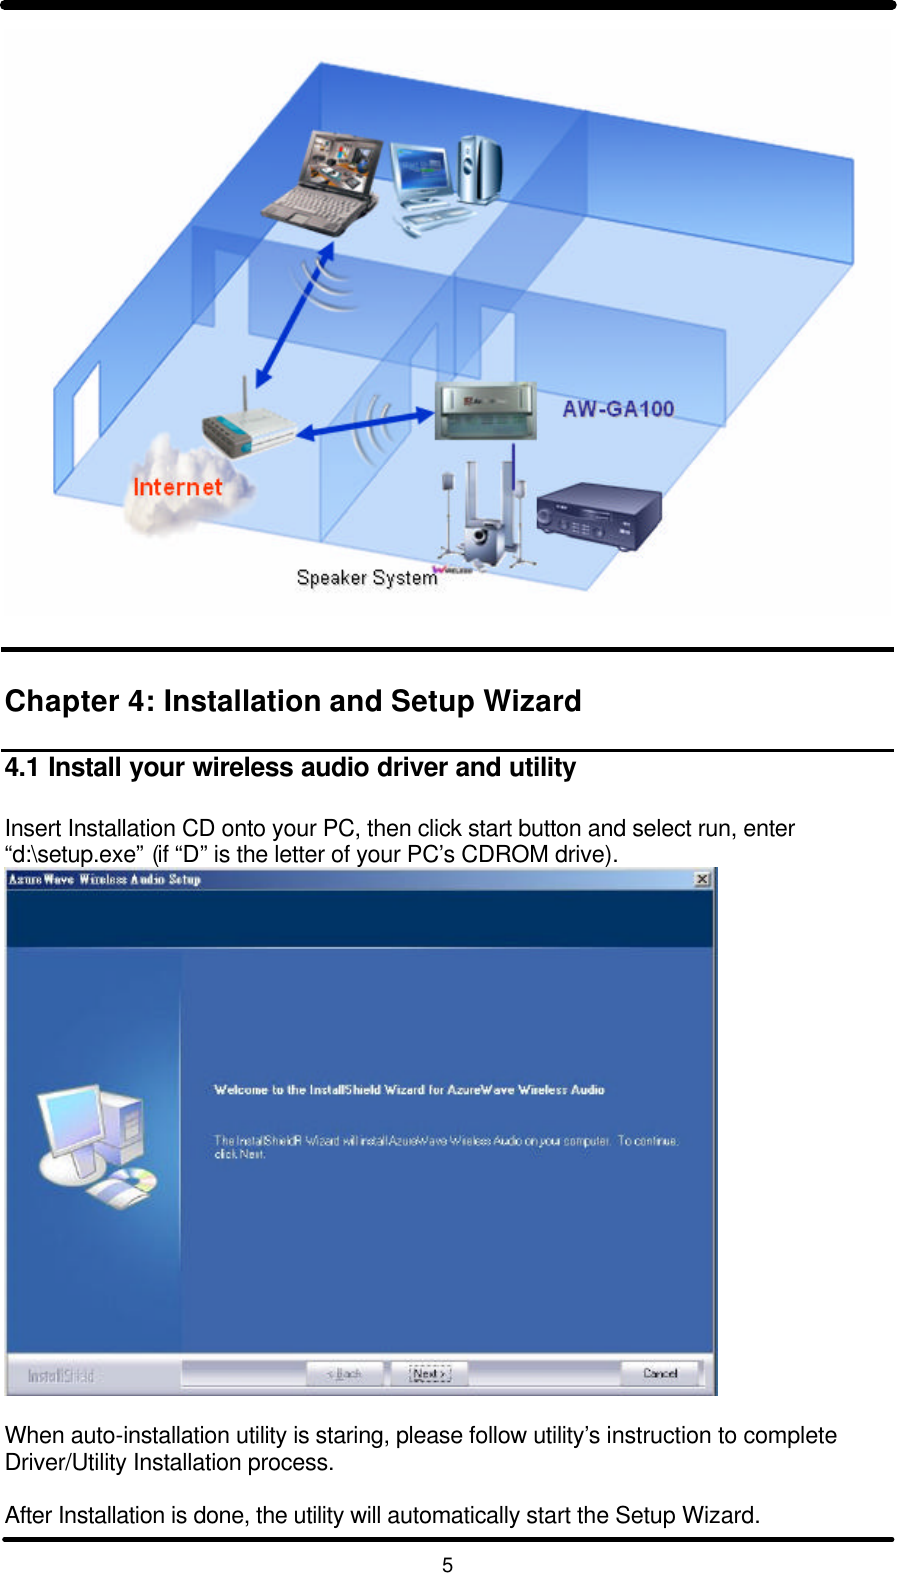   5    Chapter 4: Installation and Setup Wizard  4.1 Install your wireless audio driver and utility  Insert Installation CD onto your PC, then click start button and select run, enter “d:\setup.exe” (if “D” is the letter of your PC’s CDROM drive).   When auto-installation utility is staring, please follow utility’s instruction to complete Driver/Utility Installation process.  After Installation is done, the utility will automatically start the Setup Wizard. 